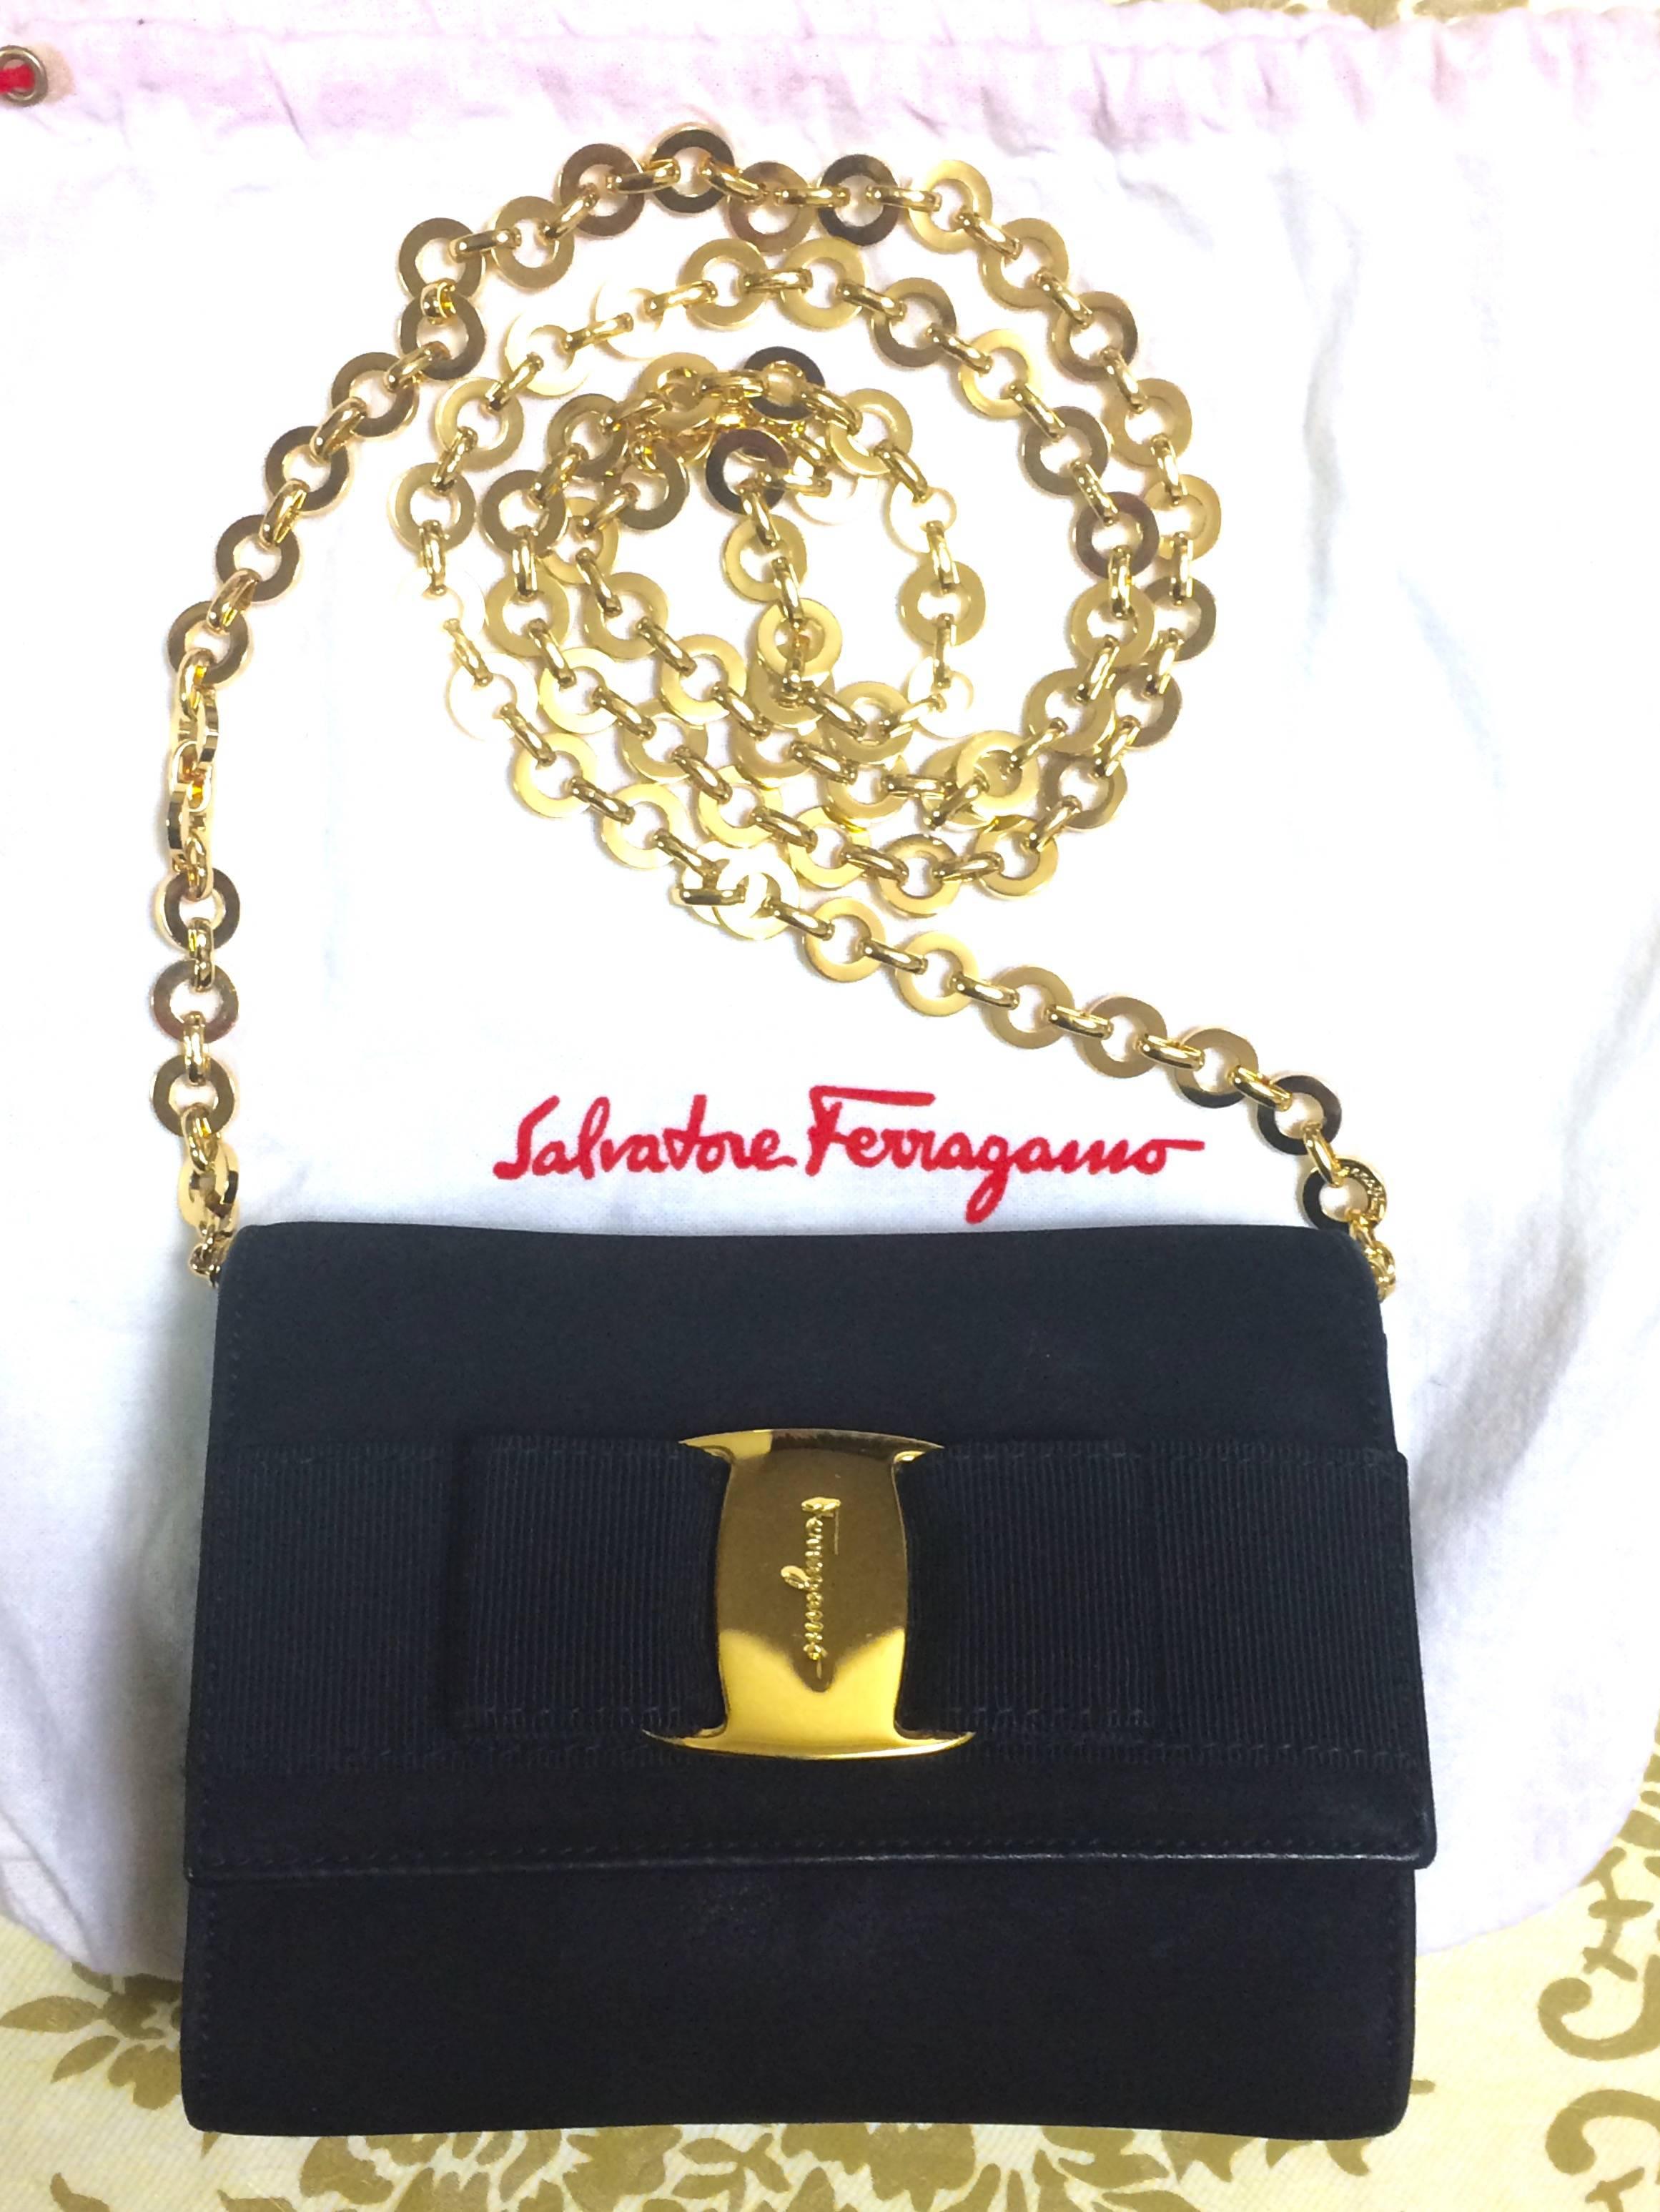 1990s. Vintage Salvatore Ferragamo black leather shoulder mini bag with golden chain and Vara bow motif. Clutch purse from Vara collection.

Excellent condition!

This is a vintage Salvatore Ferragamo's genuine black leather shoulder mini bag from